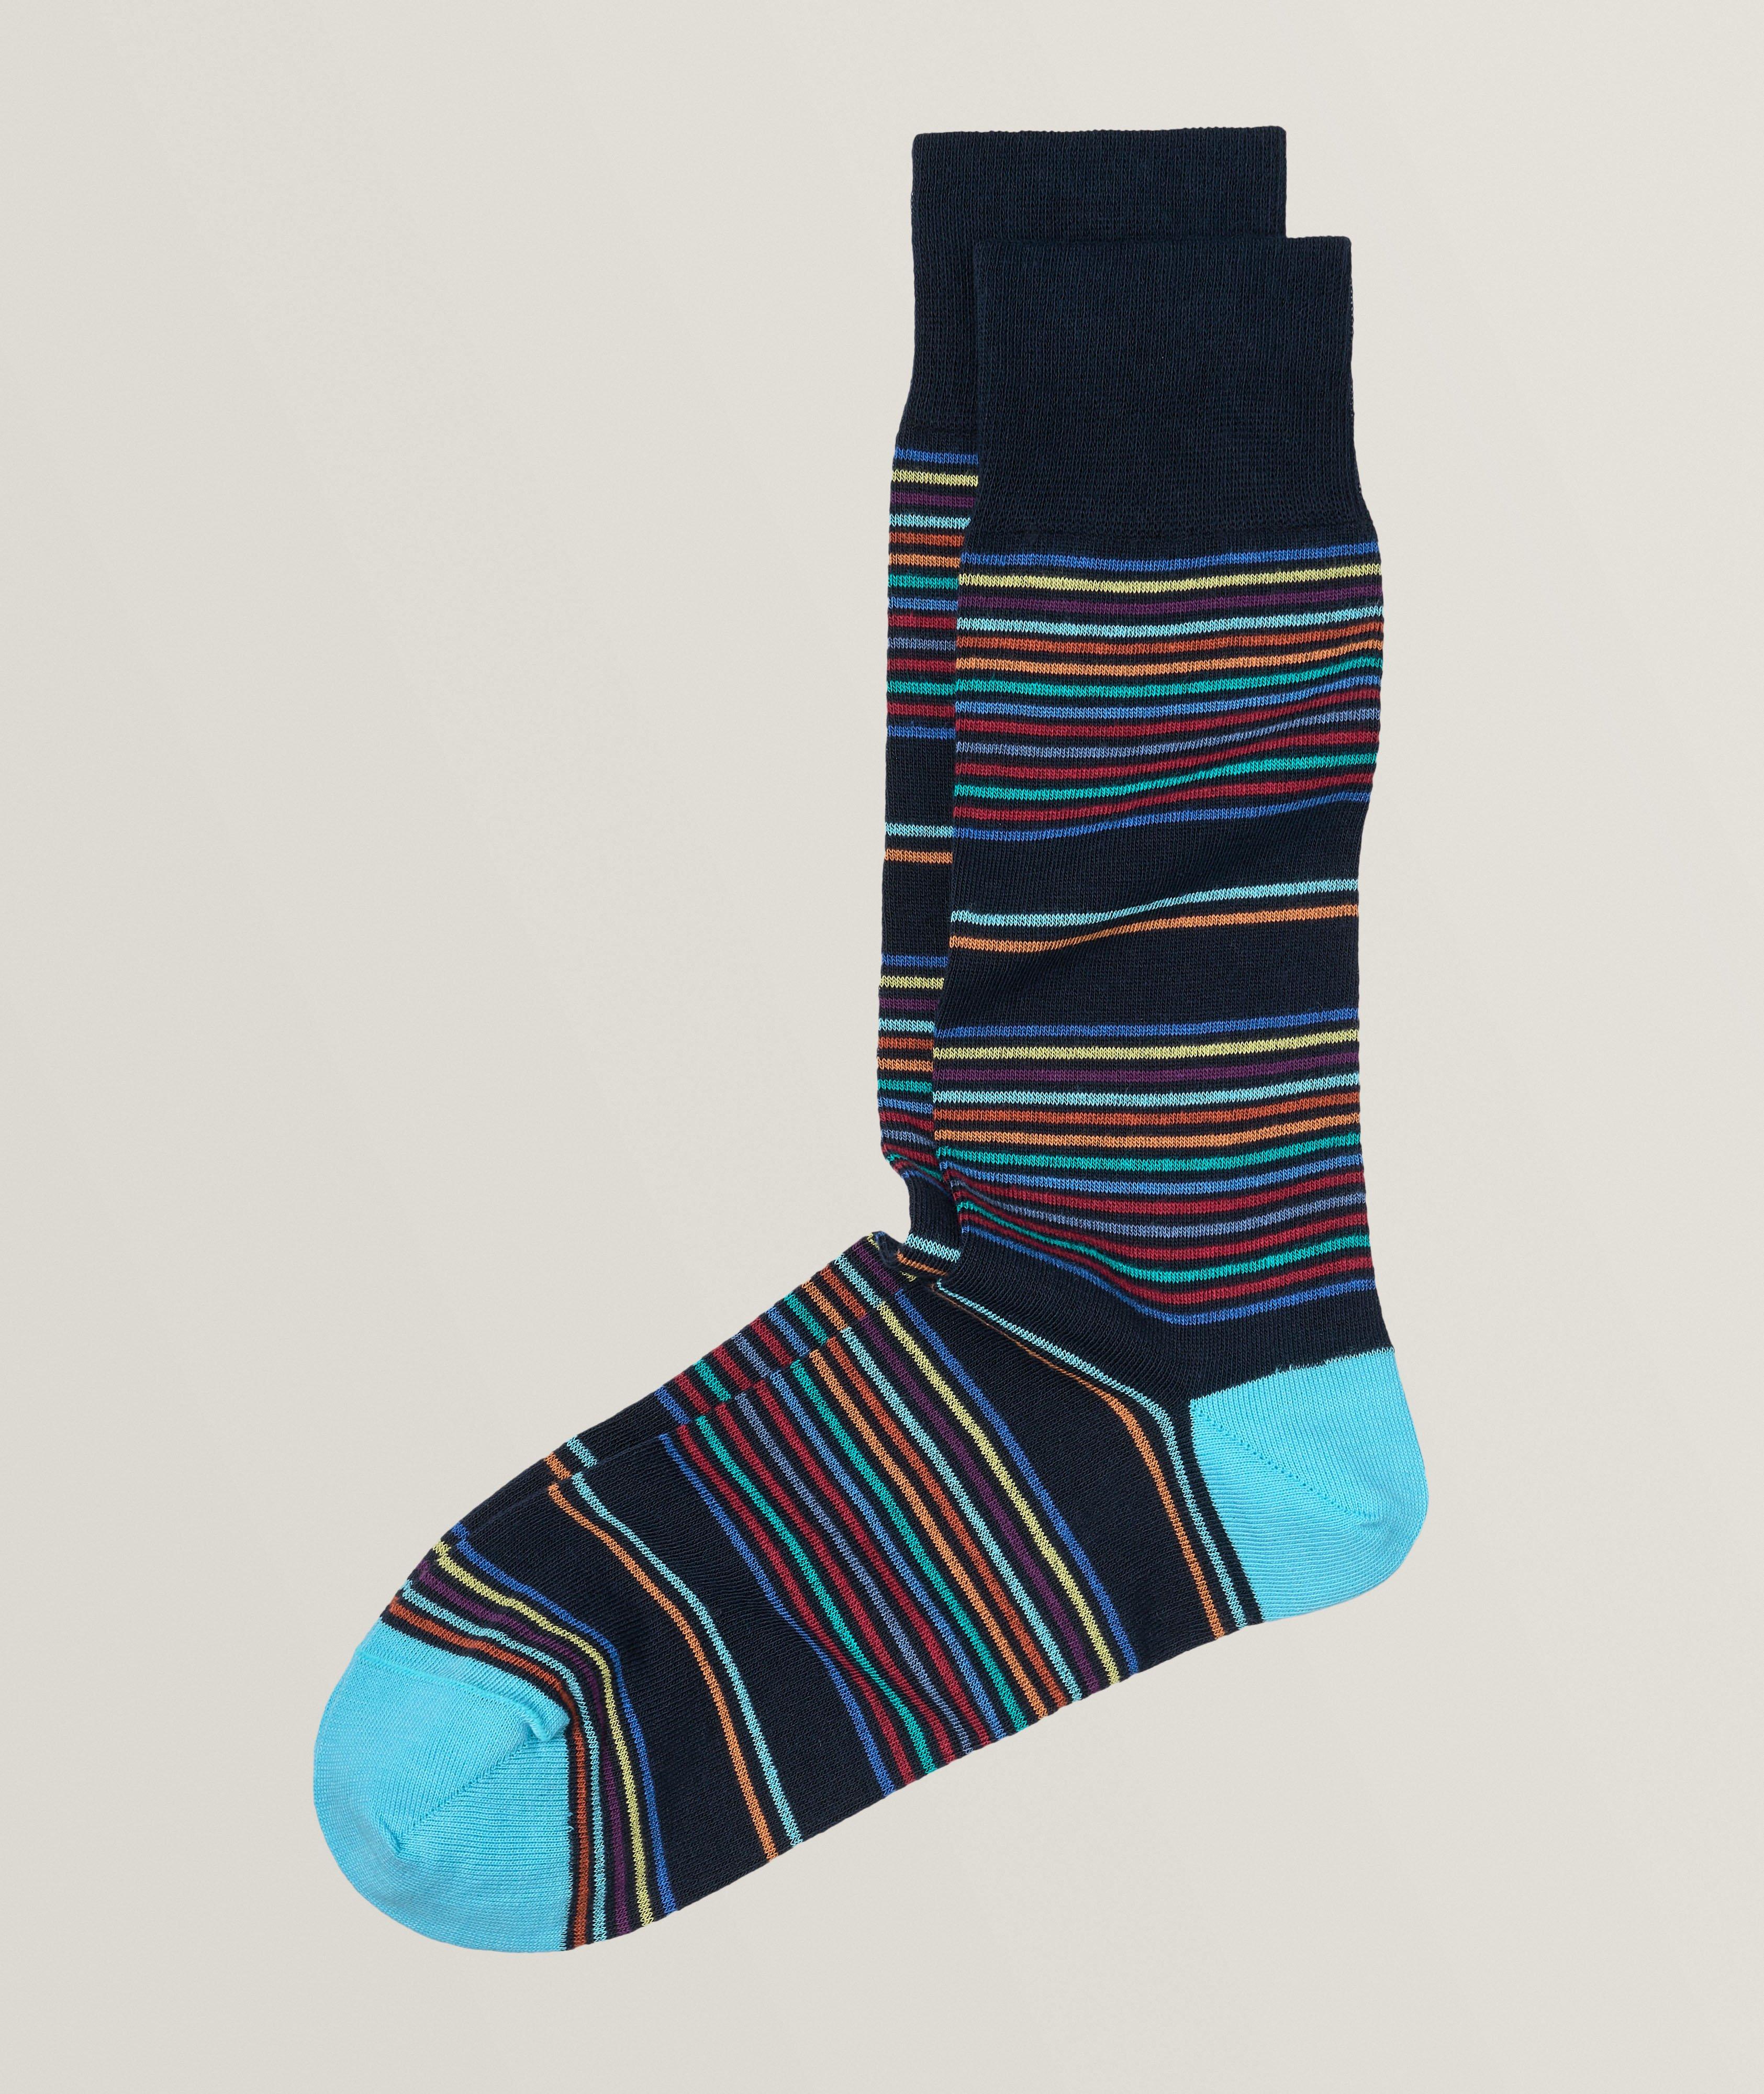 Enduring and Striking Graphic Socks is More than a Vogue for Style  Conscious Men, by Remo Tulliani